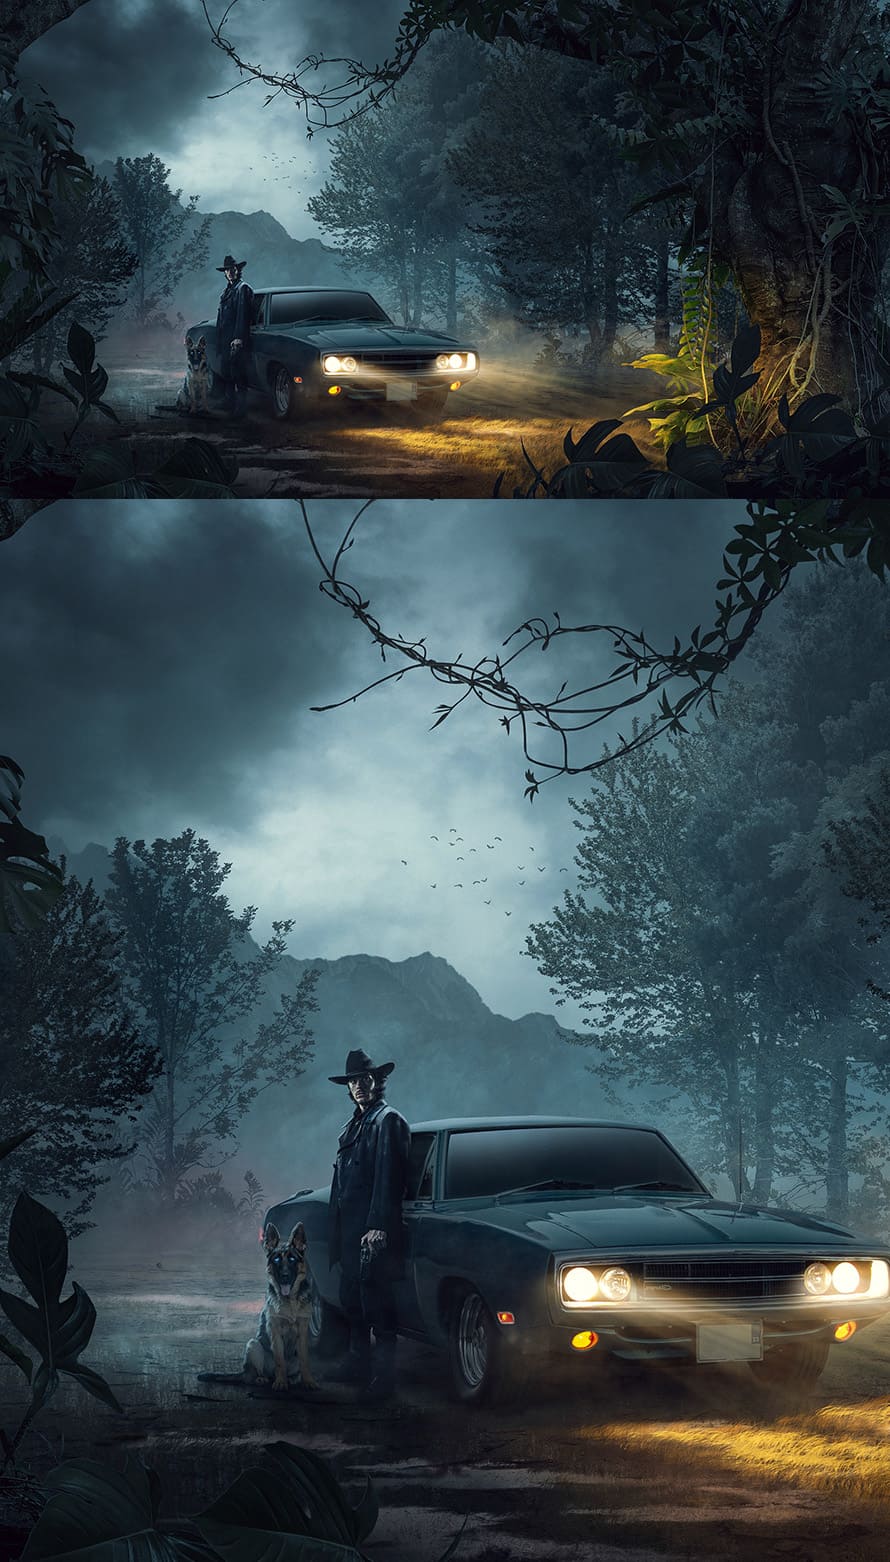 The Crime scene - Photo Manipulation Process by Mohamed Ali